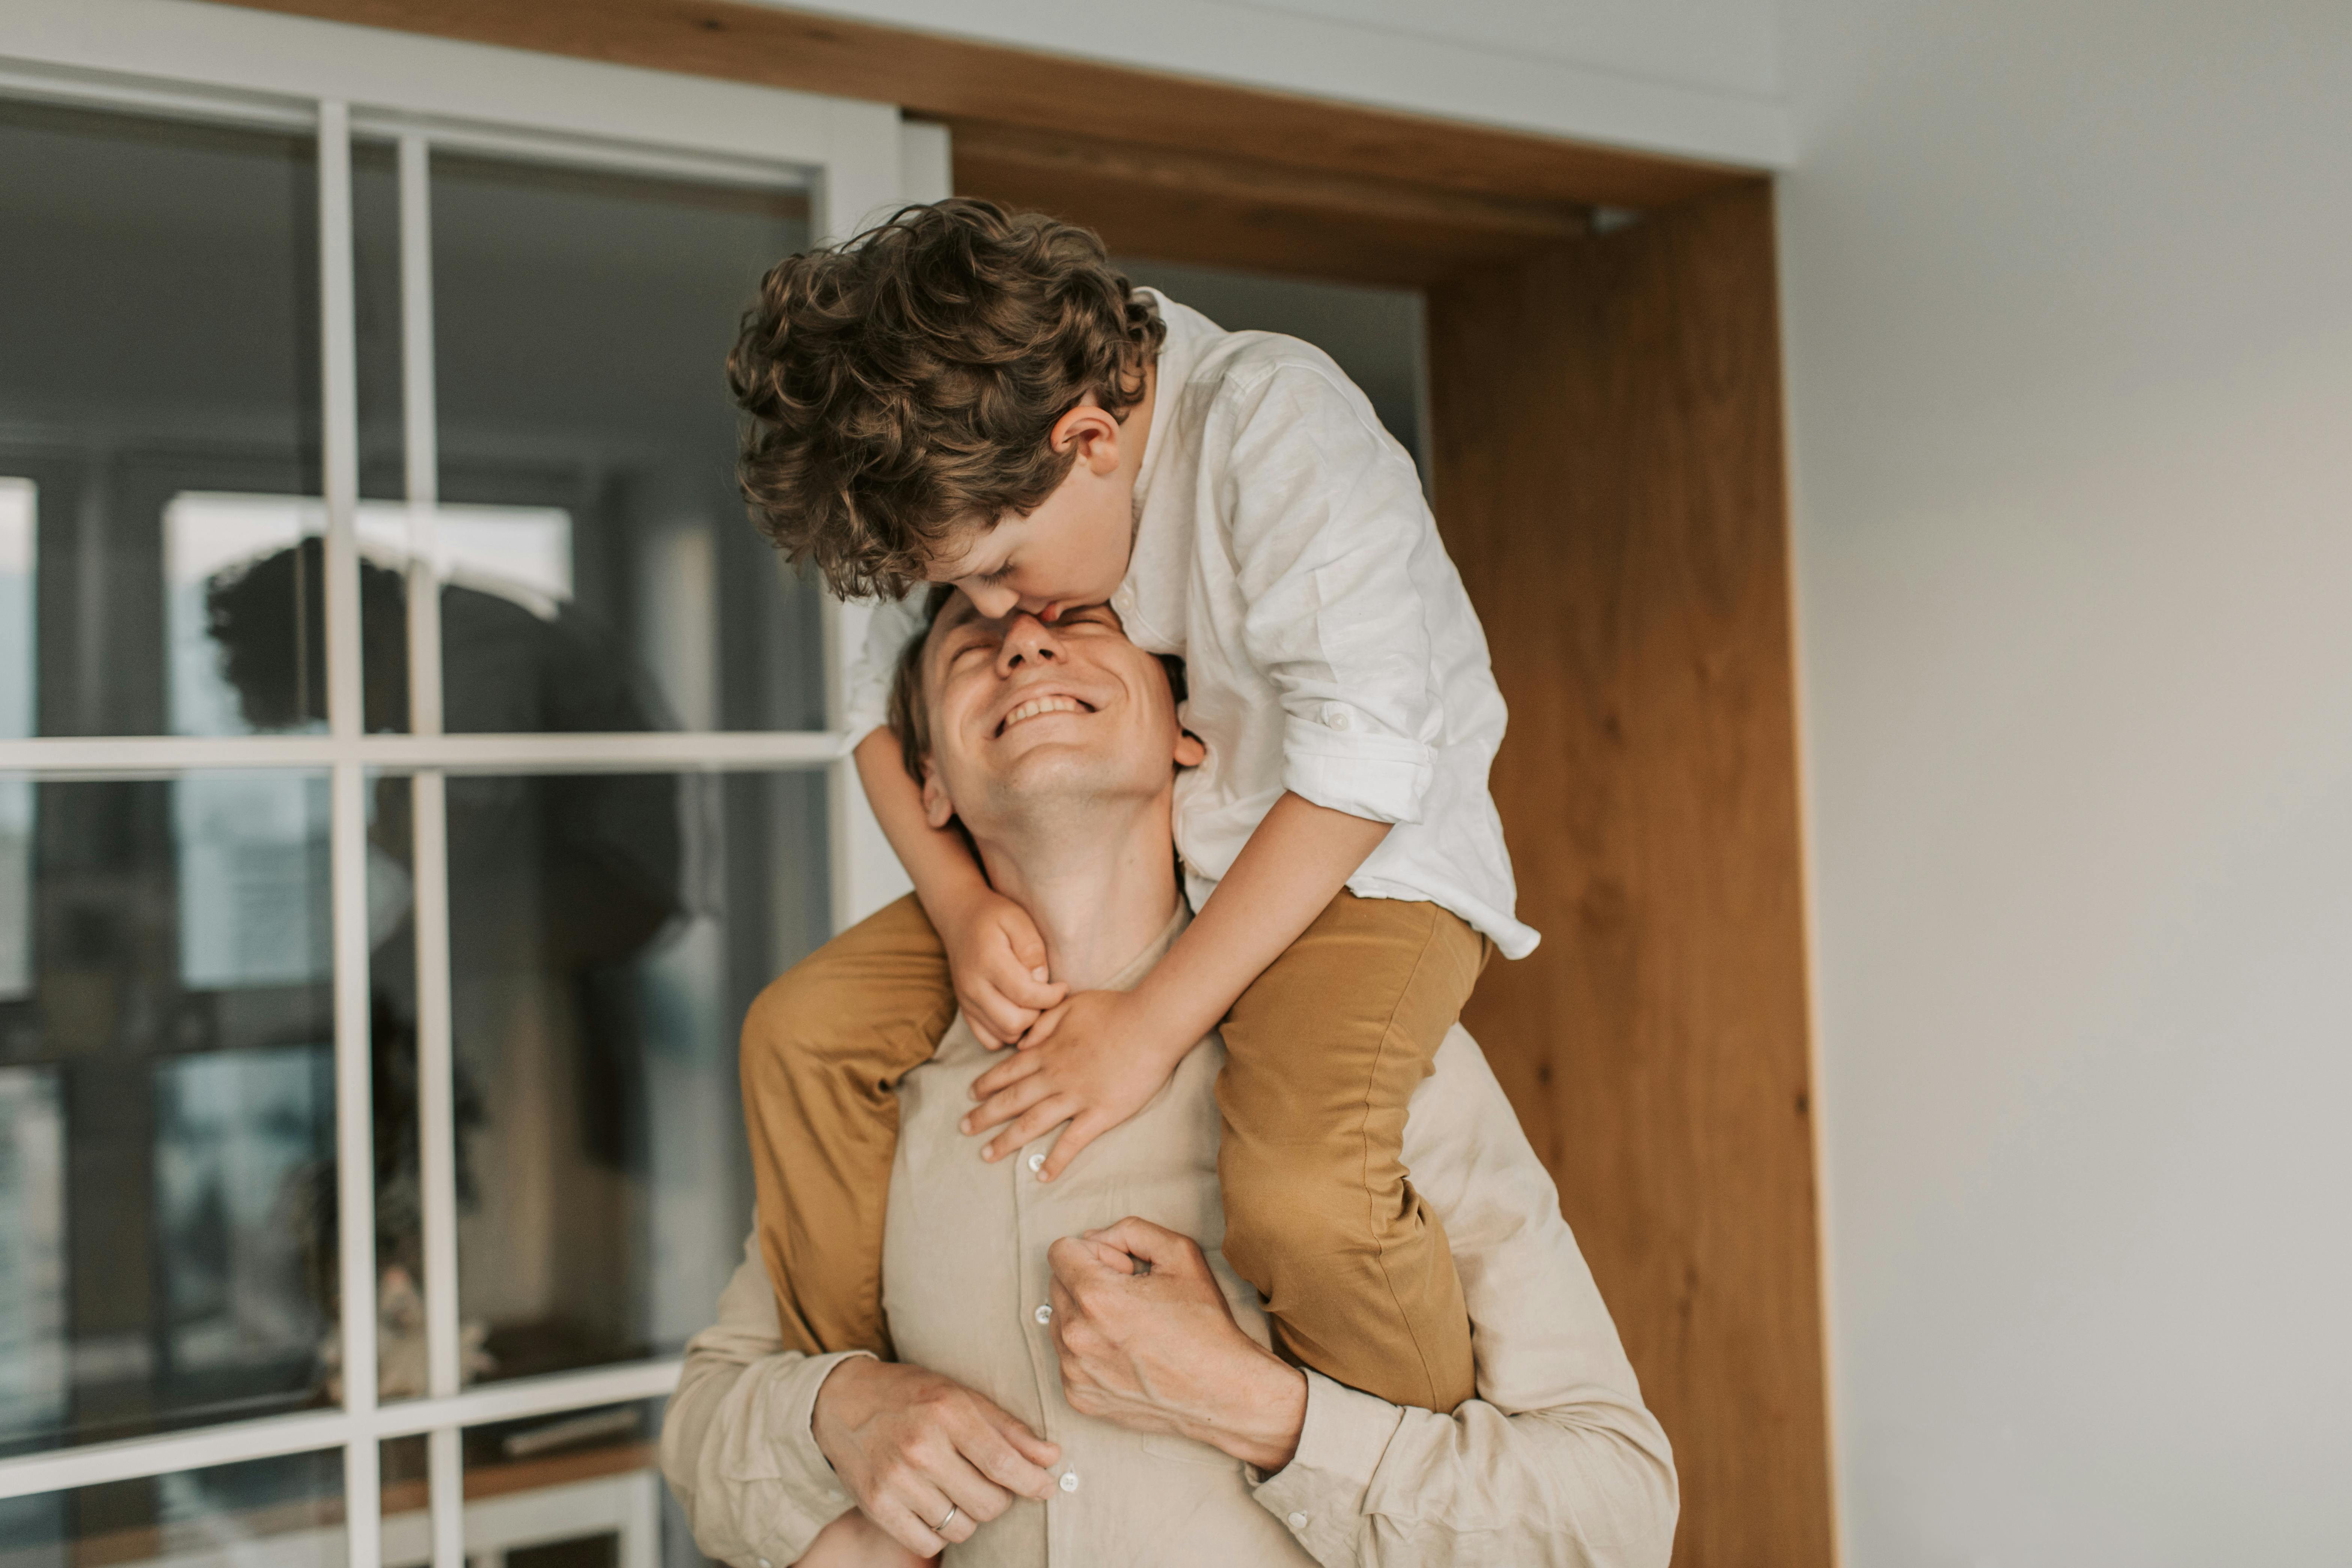 A father and son | Source: Pexels